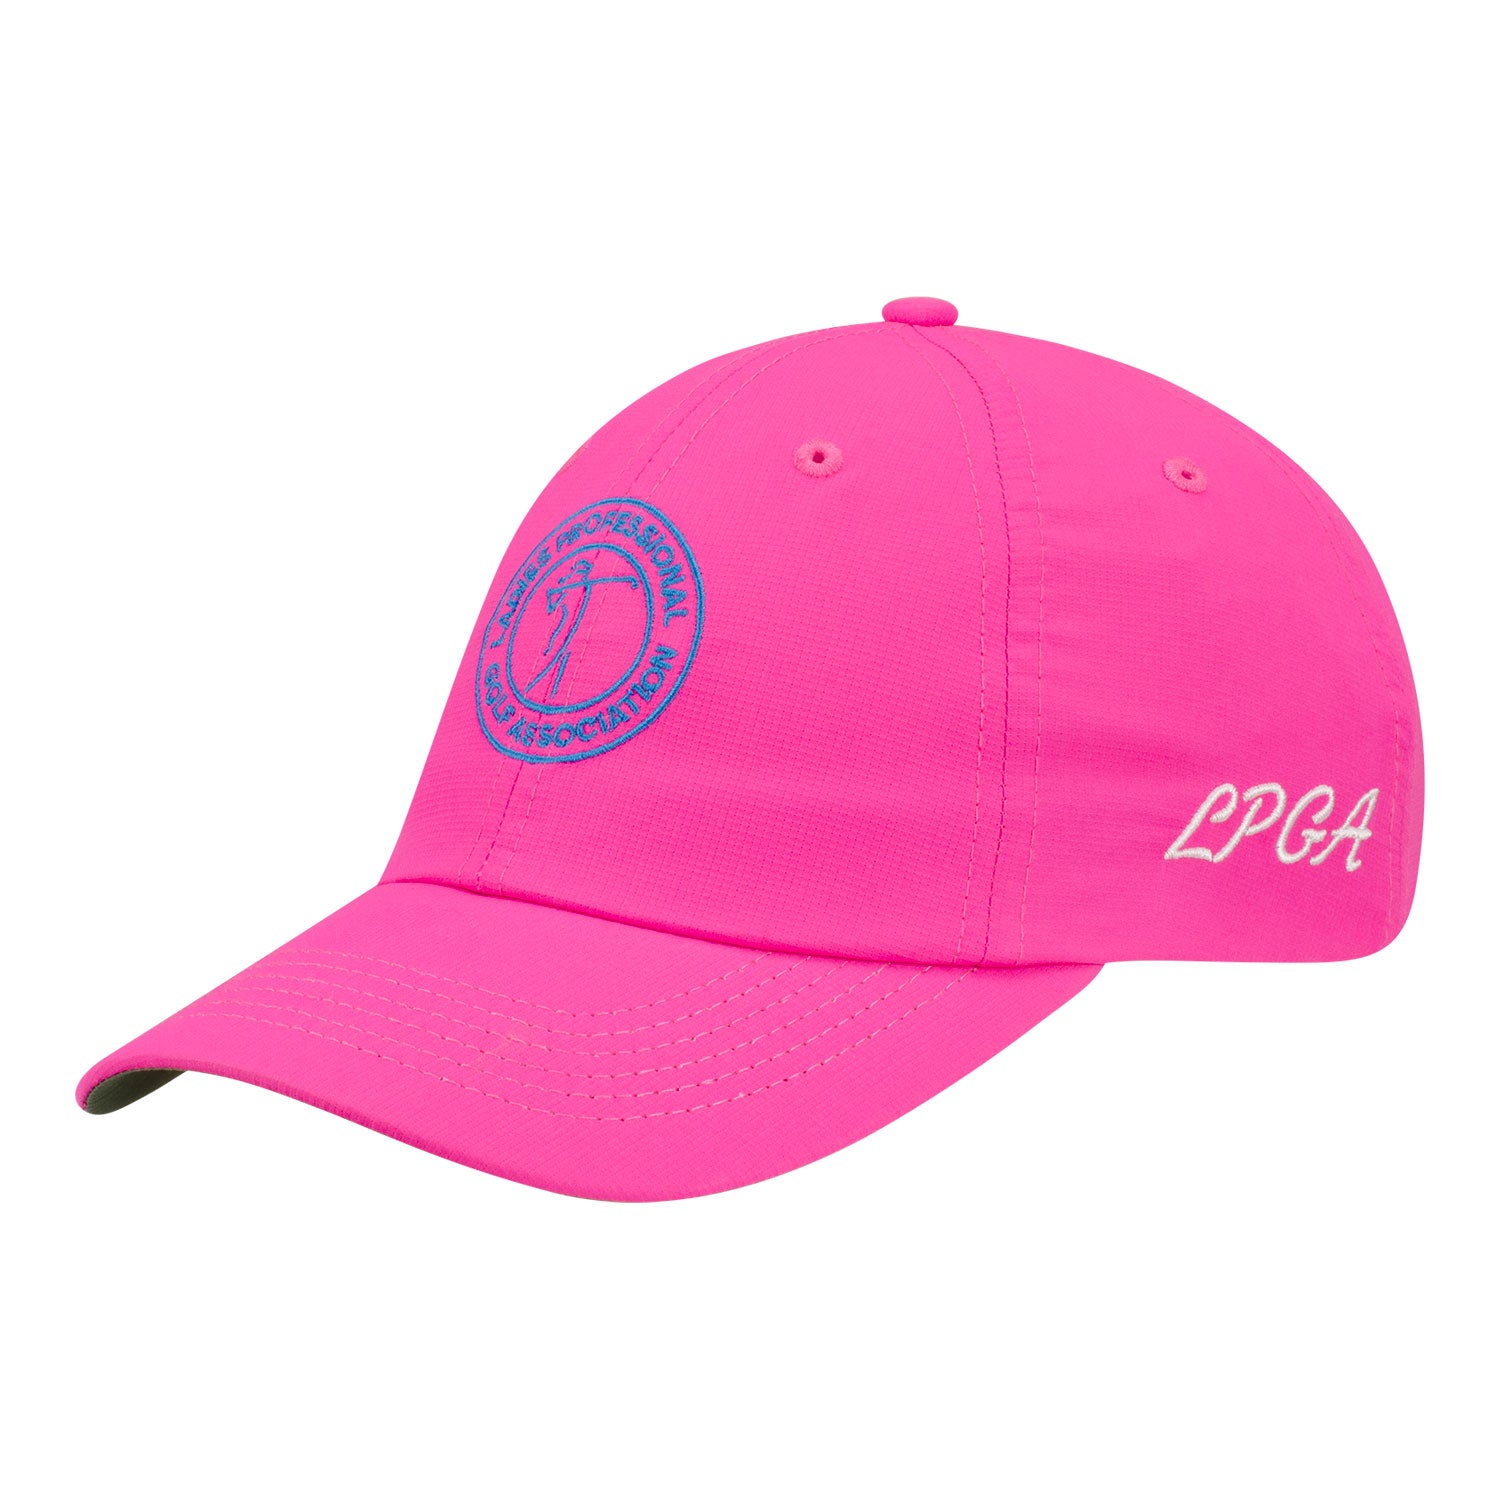 Imperial 2023 LPGA Women's Hat in Pink - Angled Left Side View